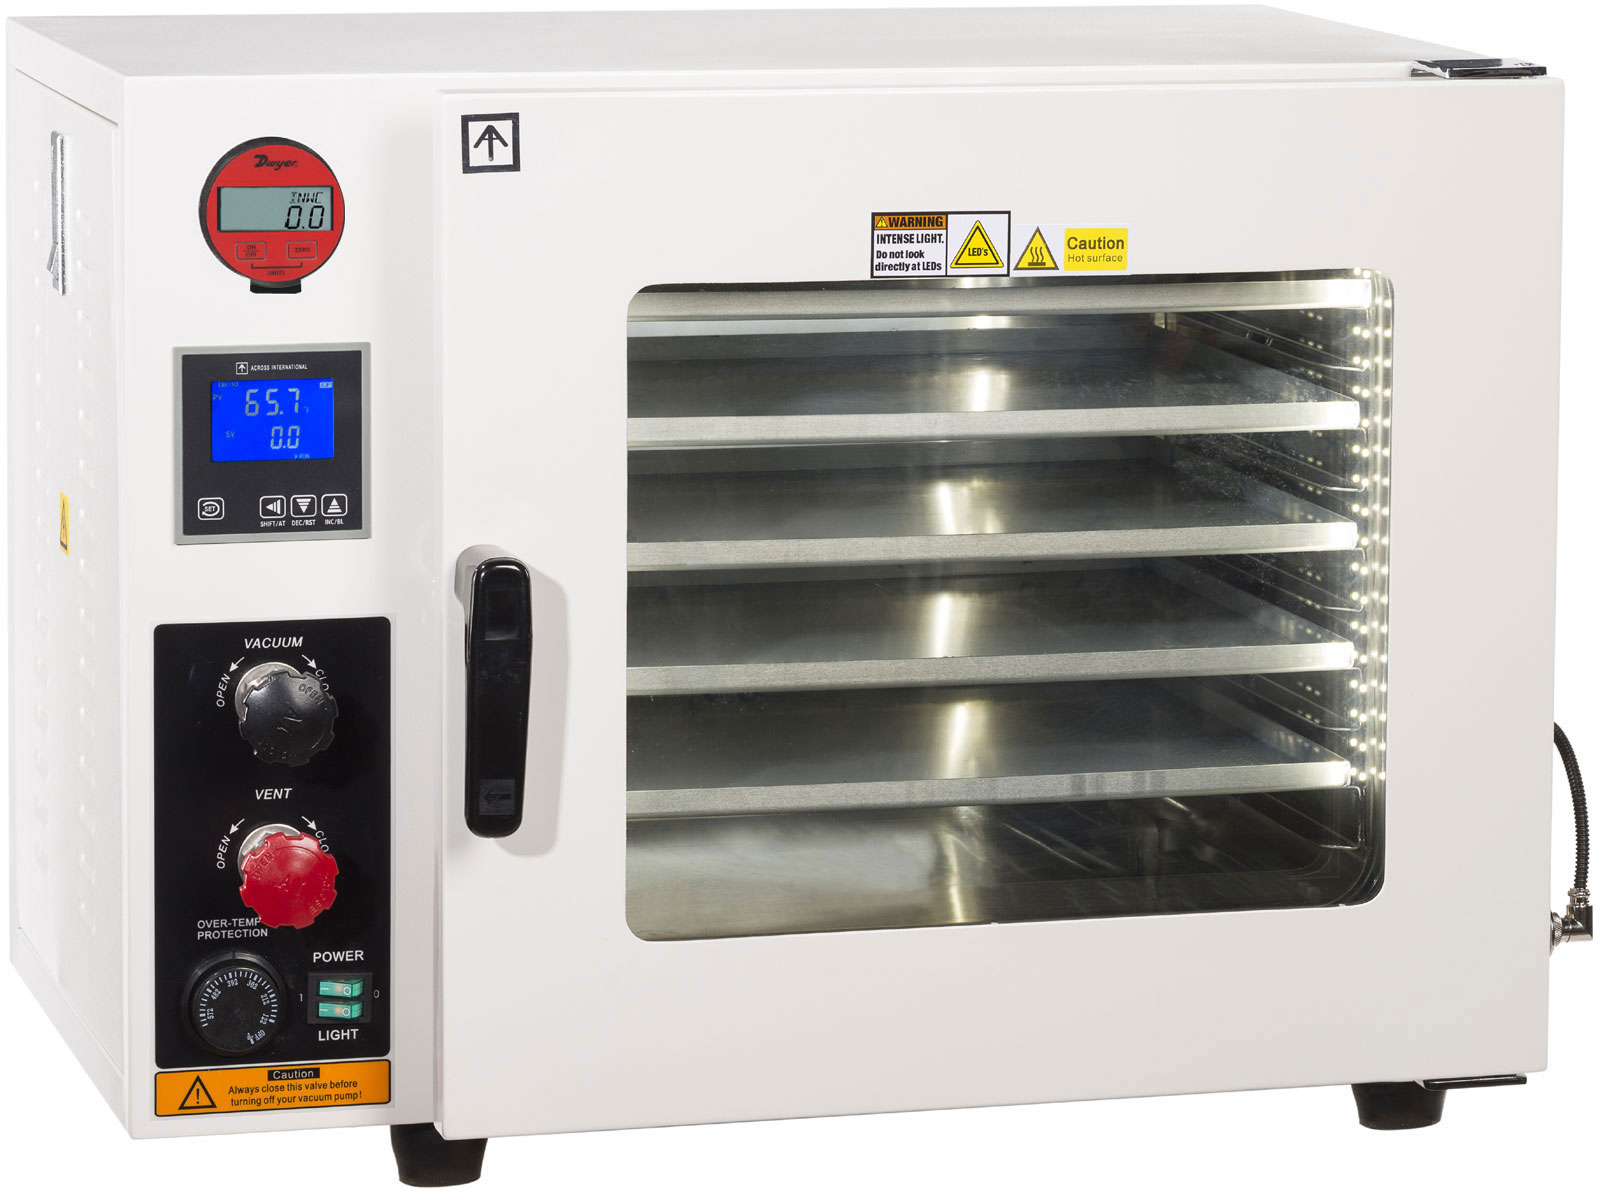 Across International AT19P7 Stainless Steel 5-Sided 1.9 cu ft Oil-Filled Gauge Vacuum Oven with Tubing/Valves LED Light and 7 cfm Compact Vacuum Pump 